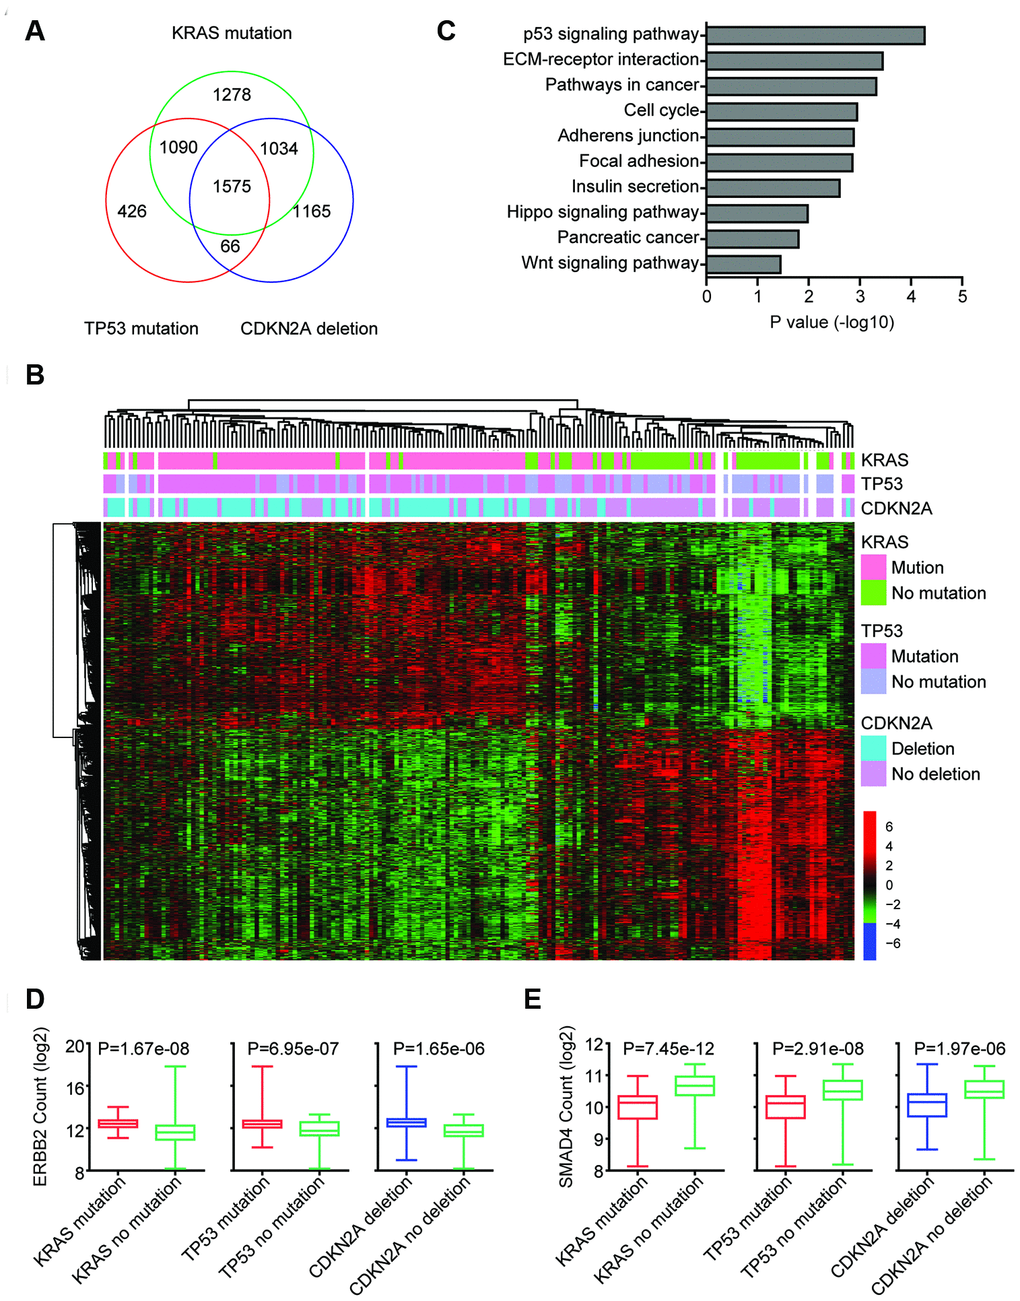 Identification of genomic alterations associated transcriptomic profiling. (A) Venn diagram depicted the number of commonly regulated genes by KRAS mutation, TP53 mutation and CDKN2A deletion in TCGA PAAD datasets. (B) Unsupervised clustering heatmap demonstrated the commonly regulated genes by KRAS mutation, TP53 mutation and CDKN2A deletion in TCGA PAAD datasets. Up-regulated (red), down-regulated (green) and unchanged (black) genes were delineated. (C) Functional pathway enrichment analysis of KRAS mutation, TP53 mutation and CDKN2A deletion commonly regulated genes using DAVID. The most significantly enriched pathways were shown. (D) Box plots showed the ERBB2 expression levels (log2 normalization count) in TCGA pancreatic cancer patients with or without genomic alterations. P values were performed using Student’s t test. (E) Box plots showed the SMAD4 expression levels (log2 normalization count) in TCGA pancreatic cancer patients with or without genomic alterations.